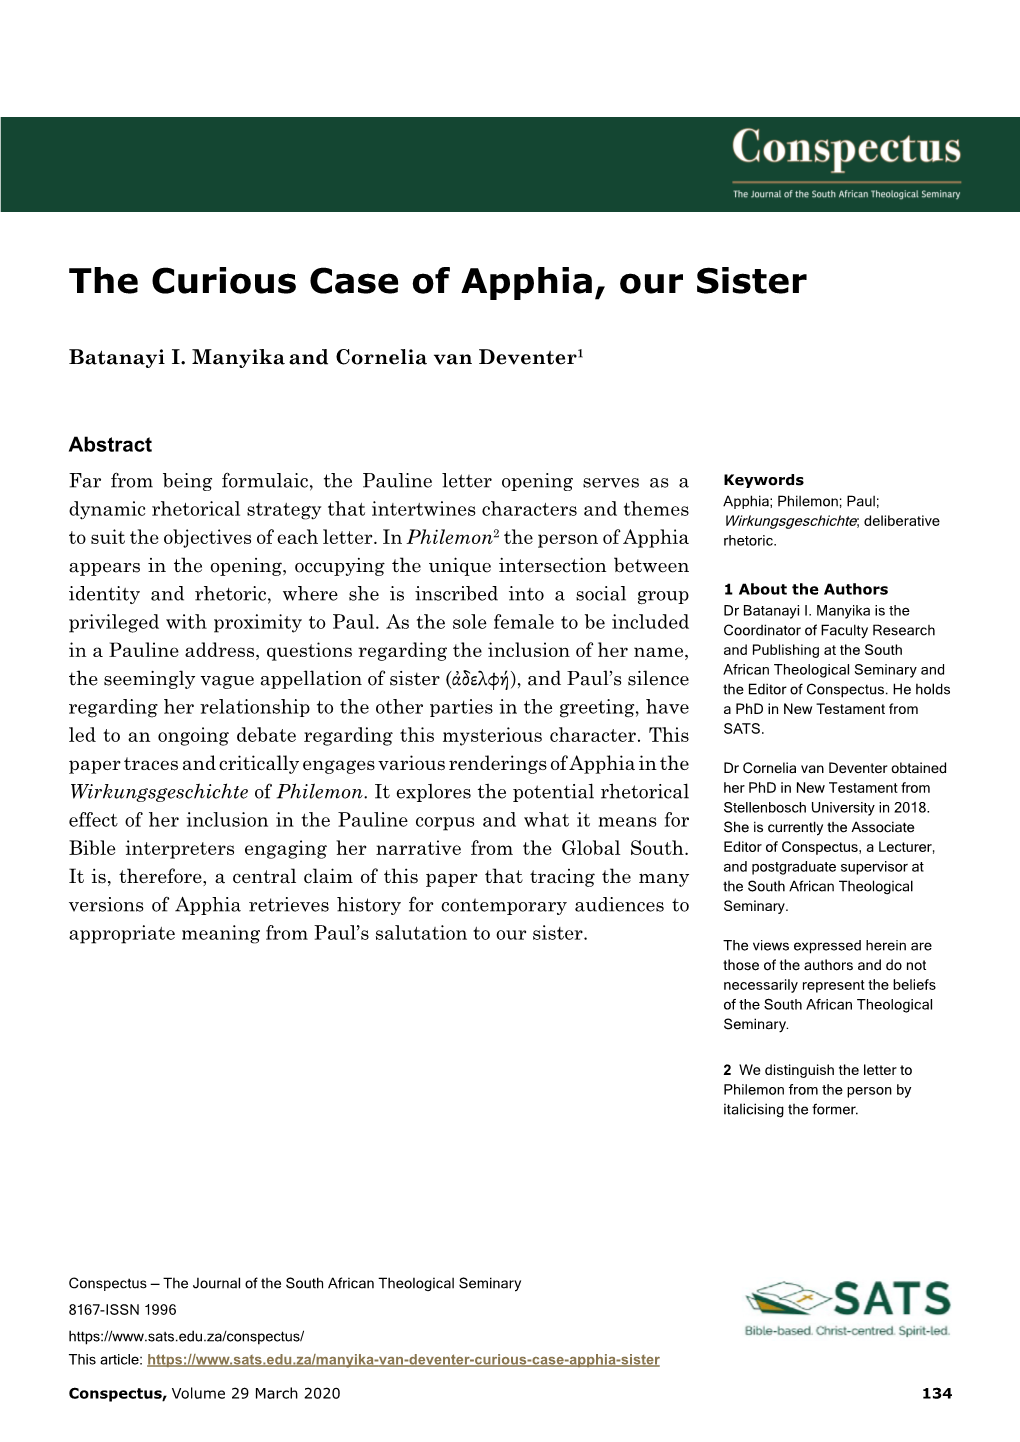 The Curious Case of Apphia, Our Sister